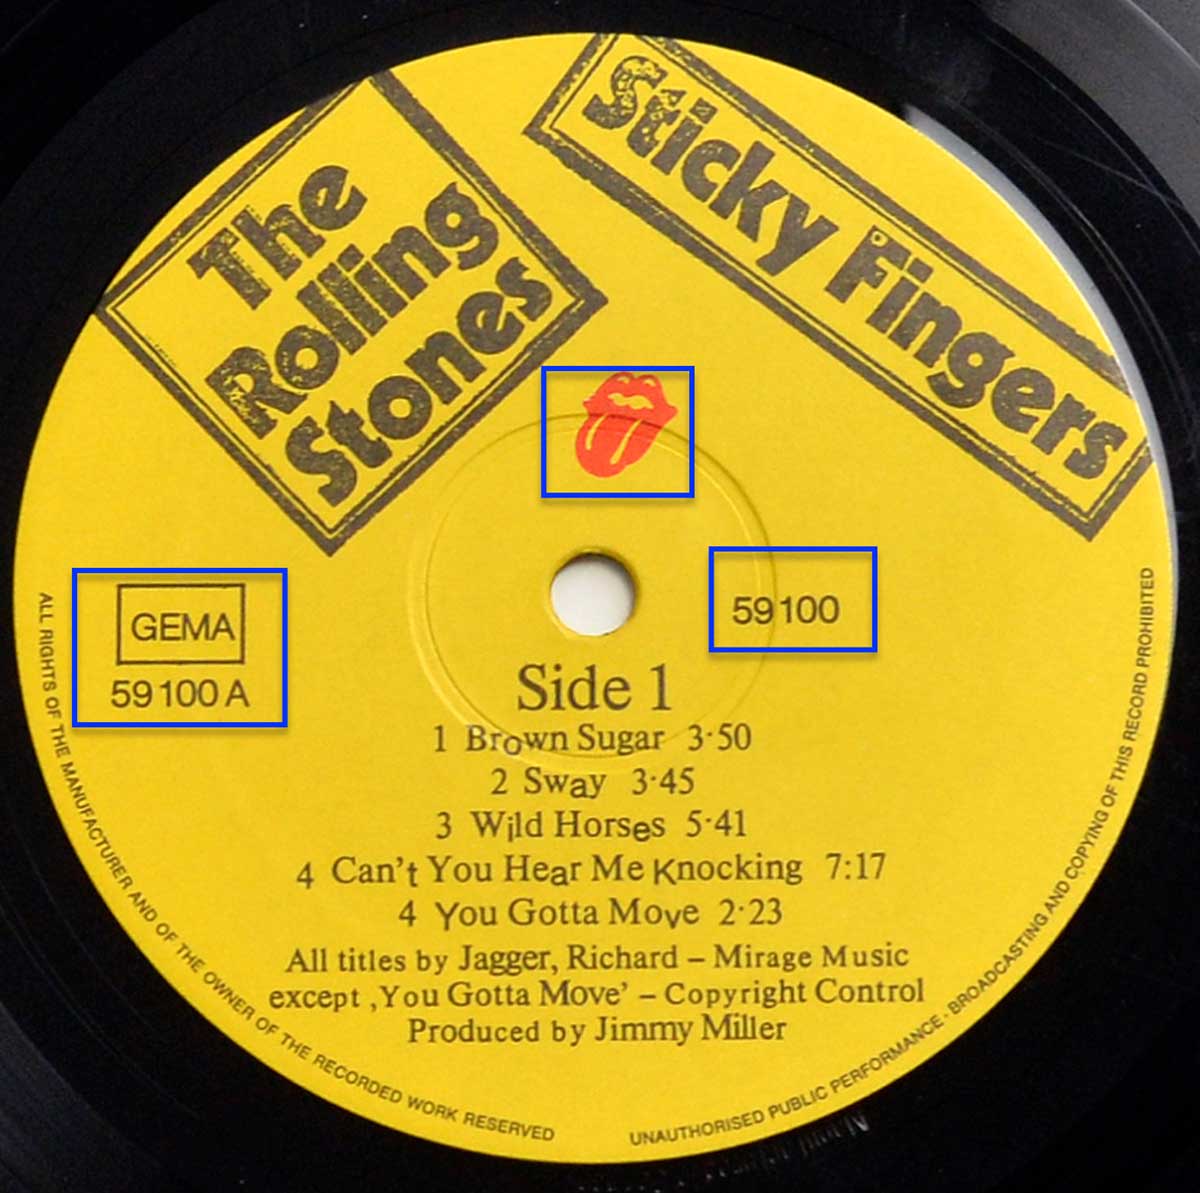 High Resolution Photo Close-UP record label 